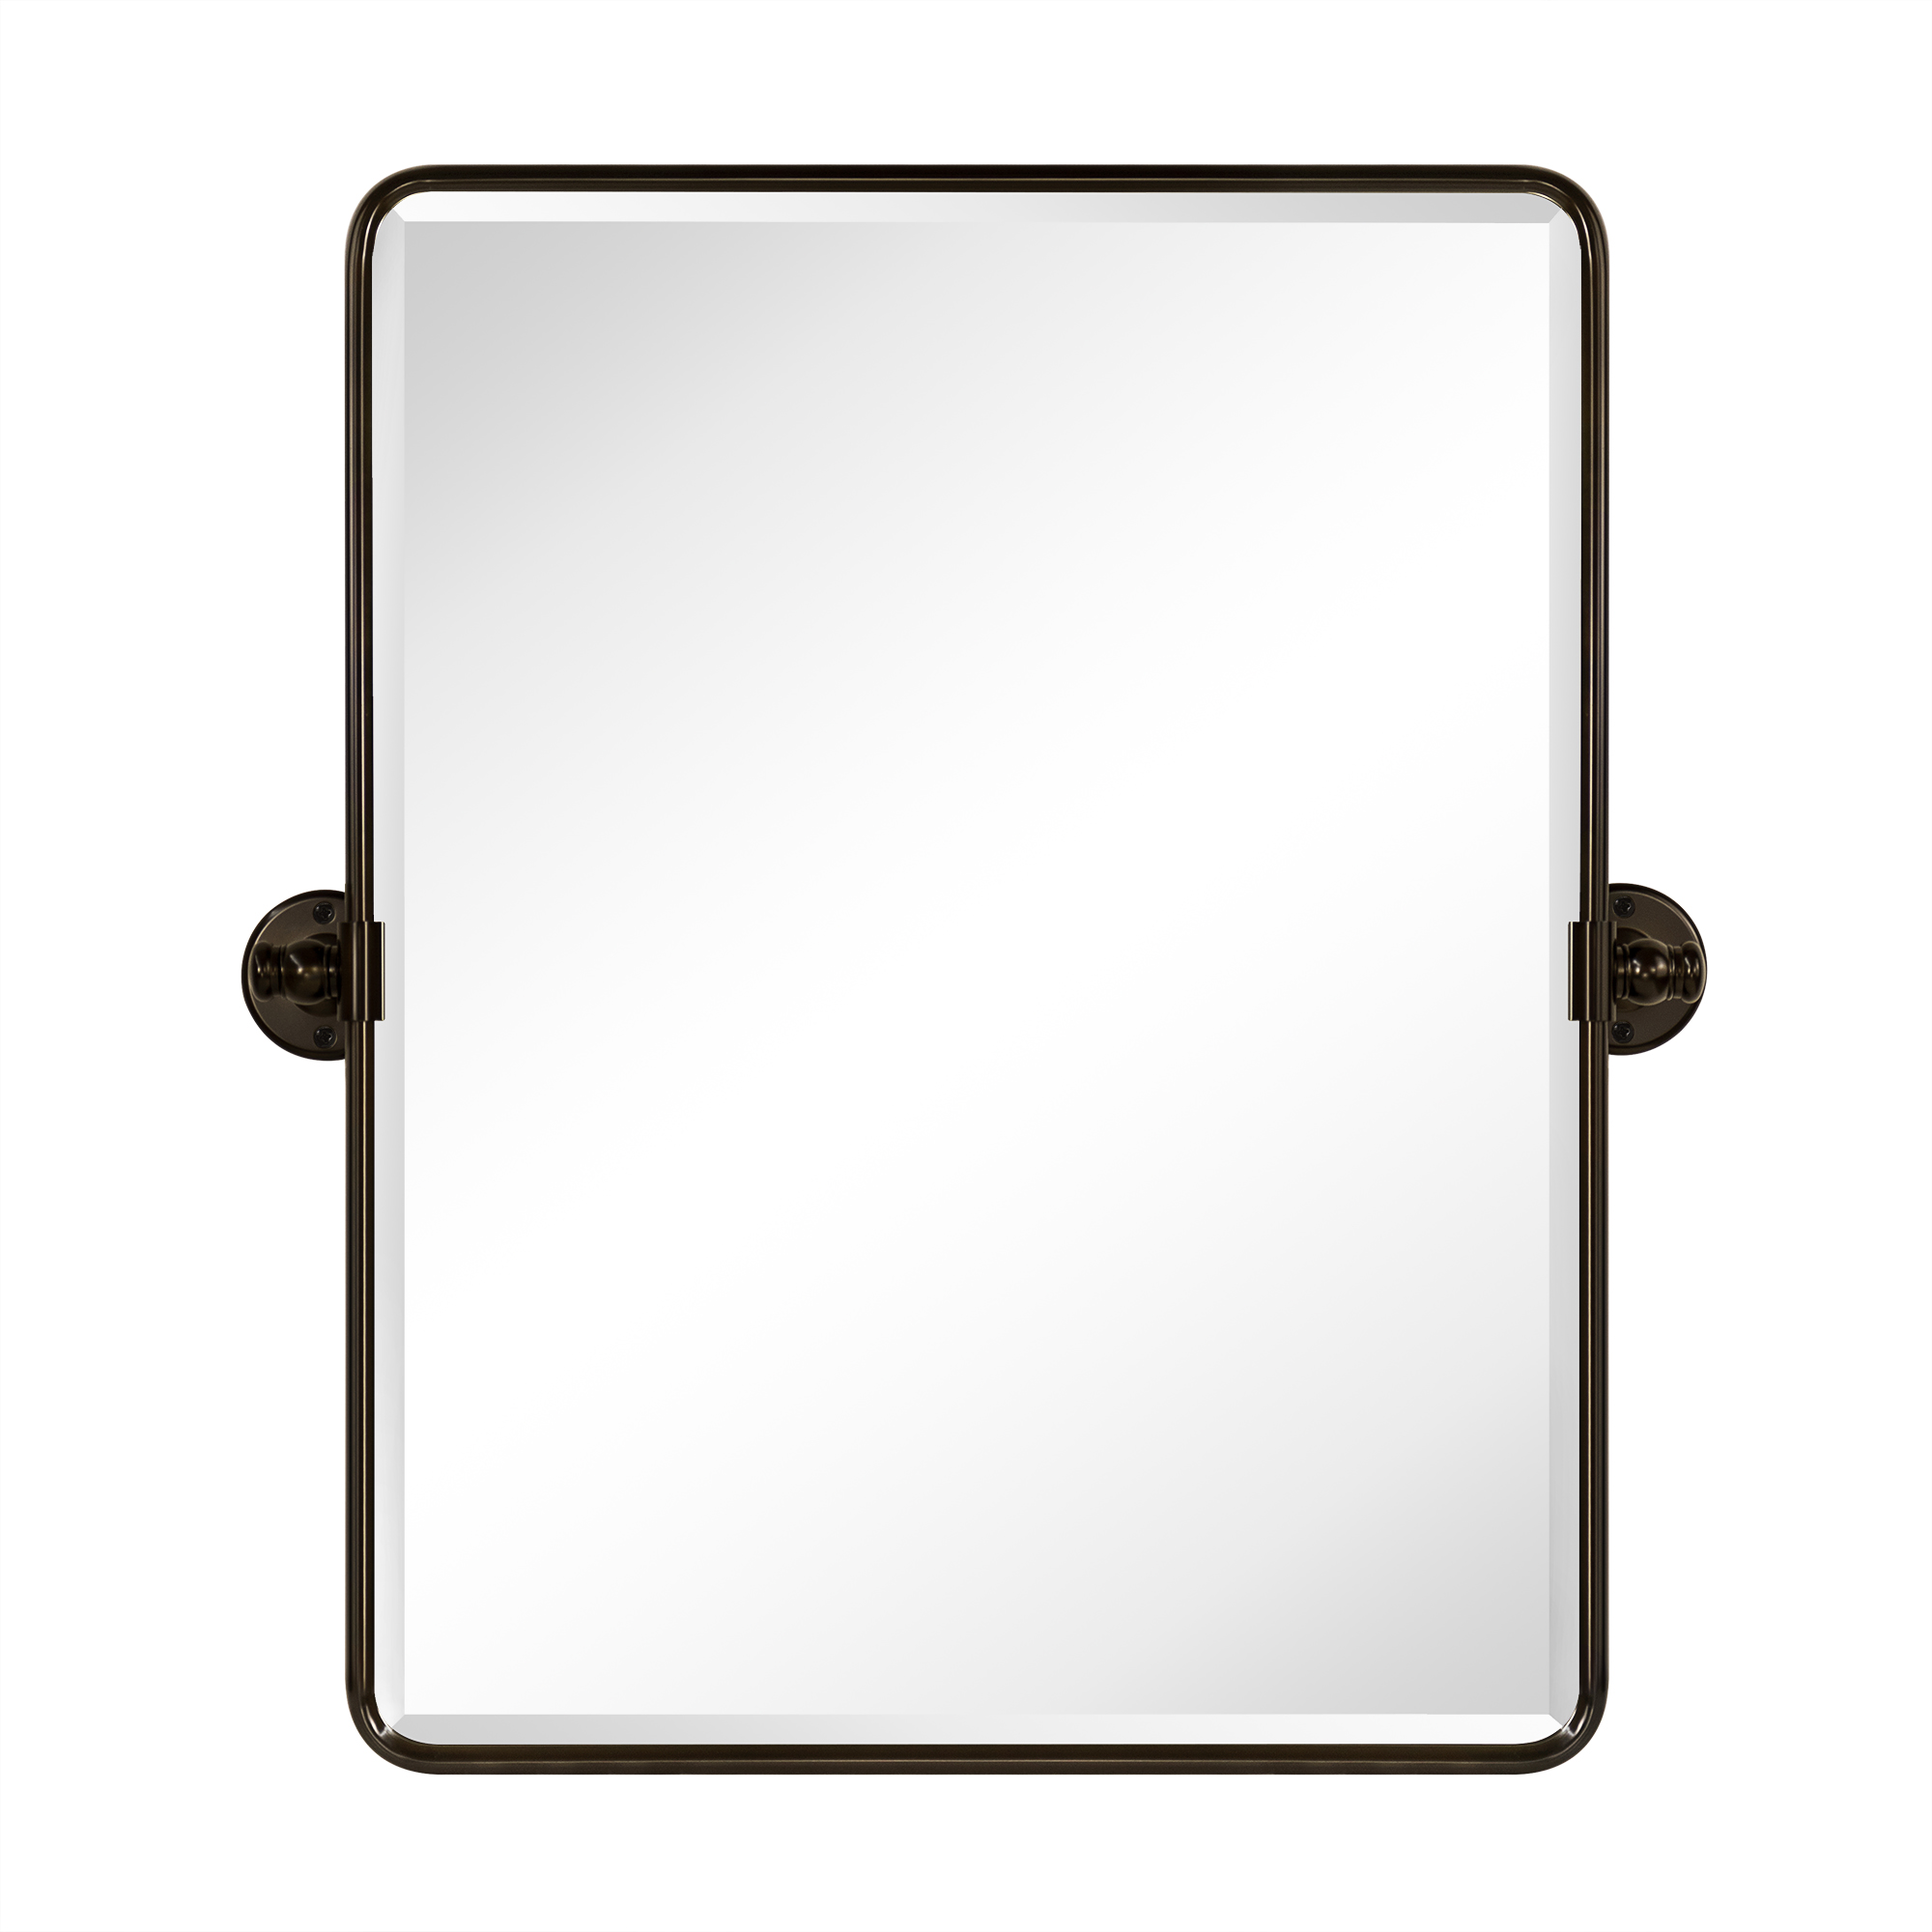 Woodvale Rectangle Metal Wall Mirrors-19x24" Oil Rubbed Bronze